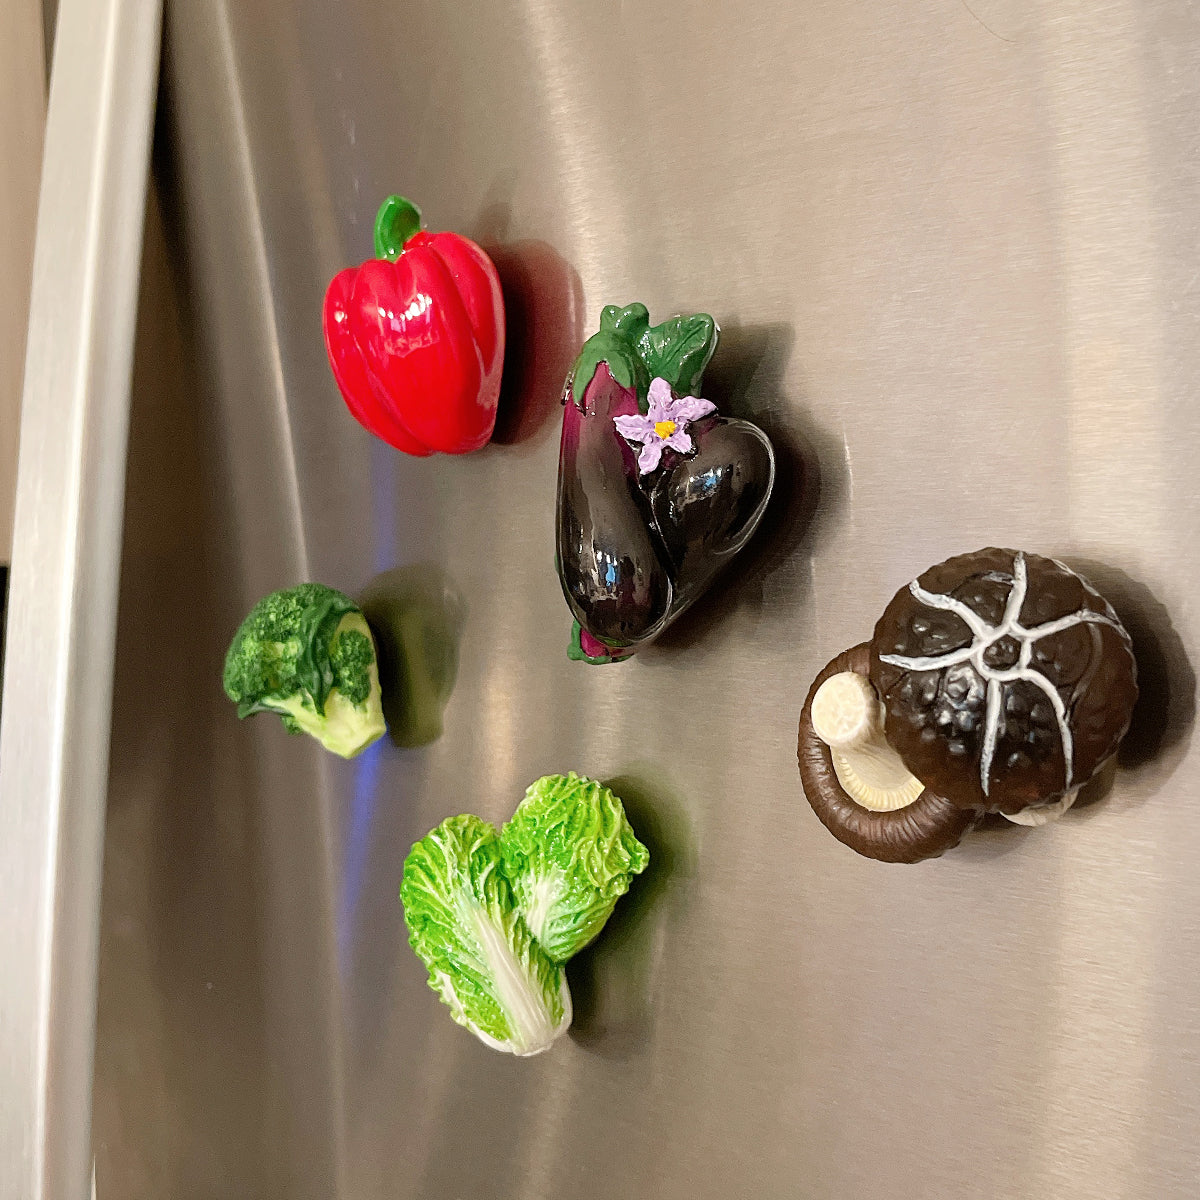 Wrapables 3D Resin Fridge Magnets, Food Simulation, Succulents, Famous Faces Refrigerator Magnets for Kitchen (Set of 5)